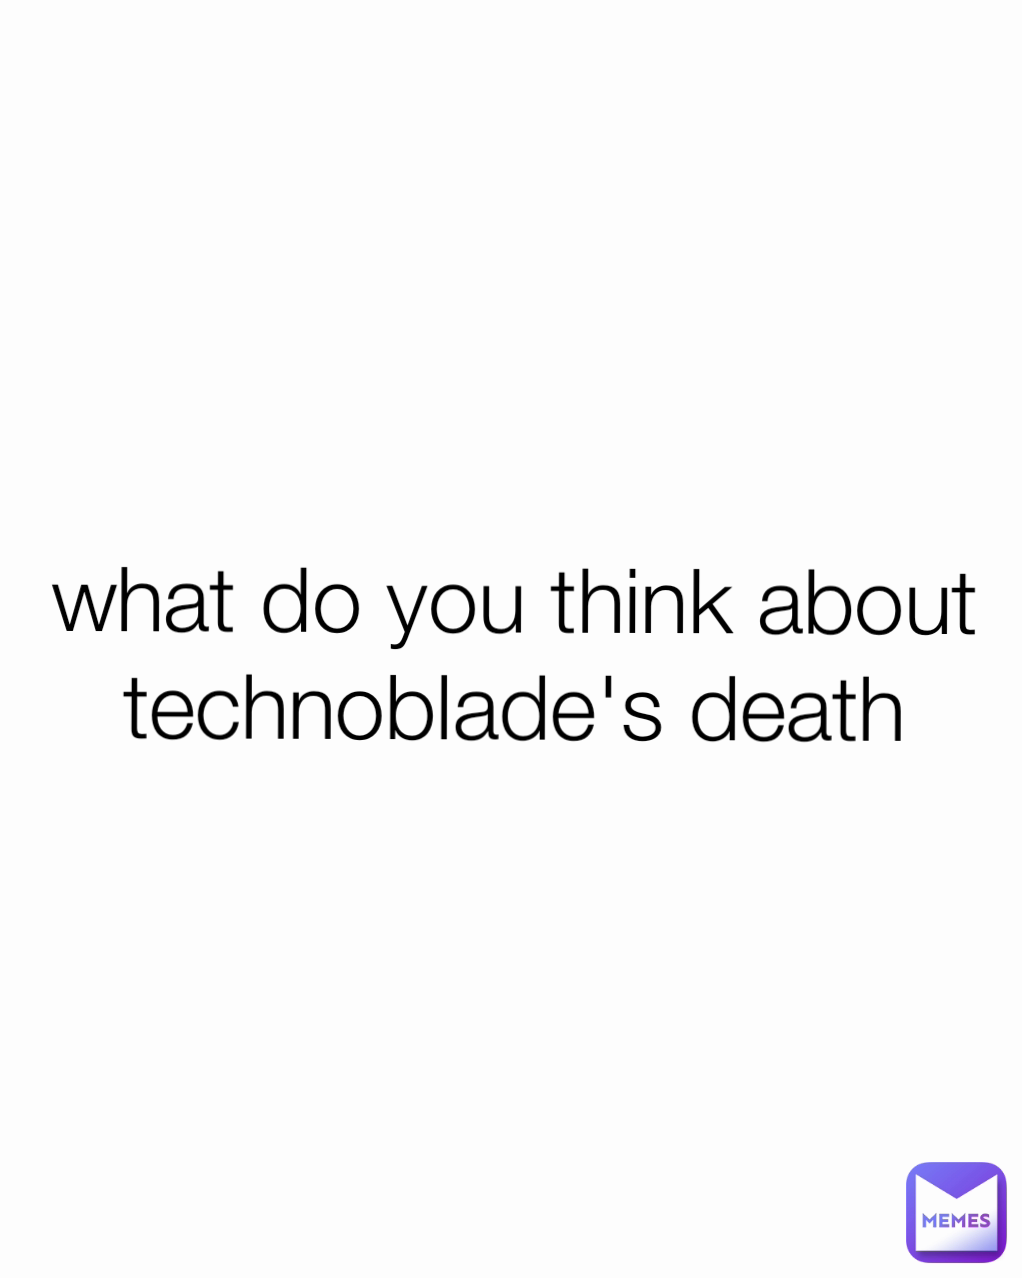 what do you think about technoblade's death